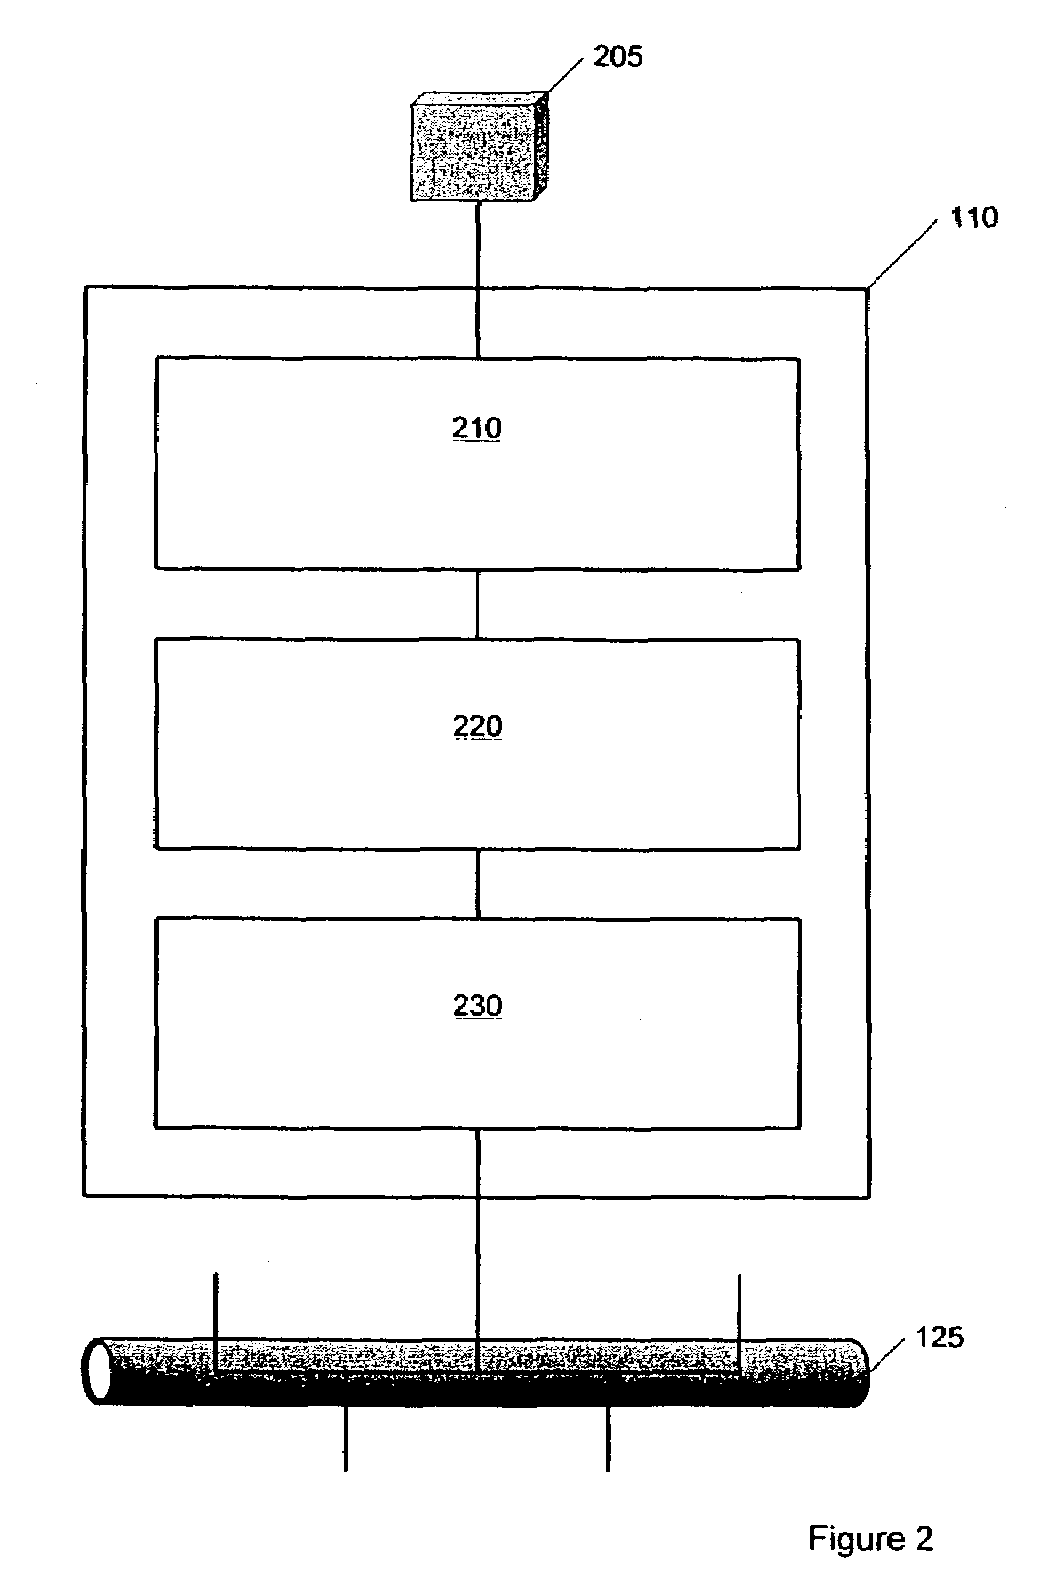 System for translation and communication of messaging protocols into a common protocol